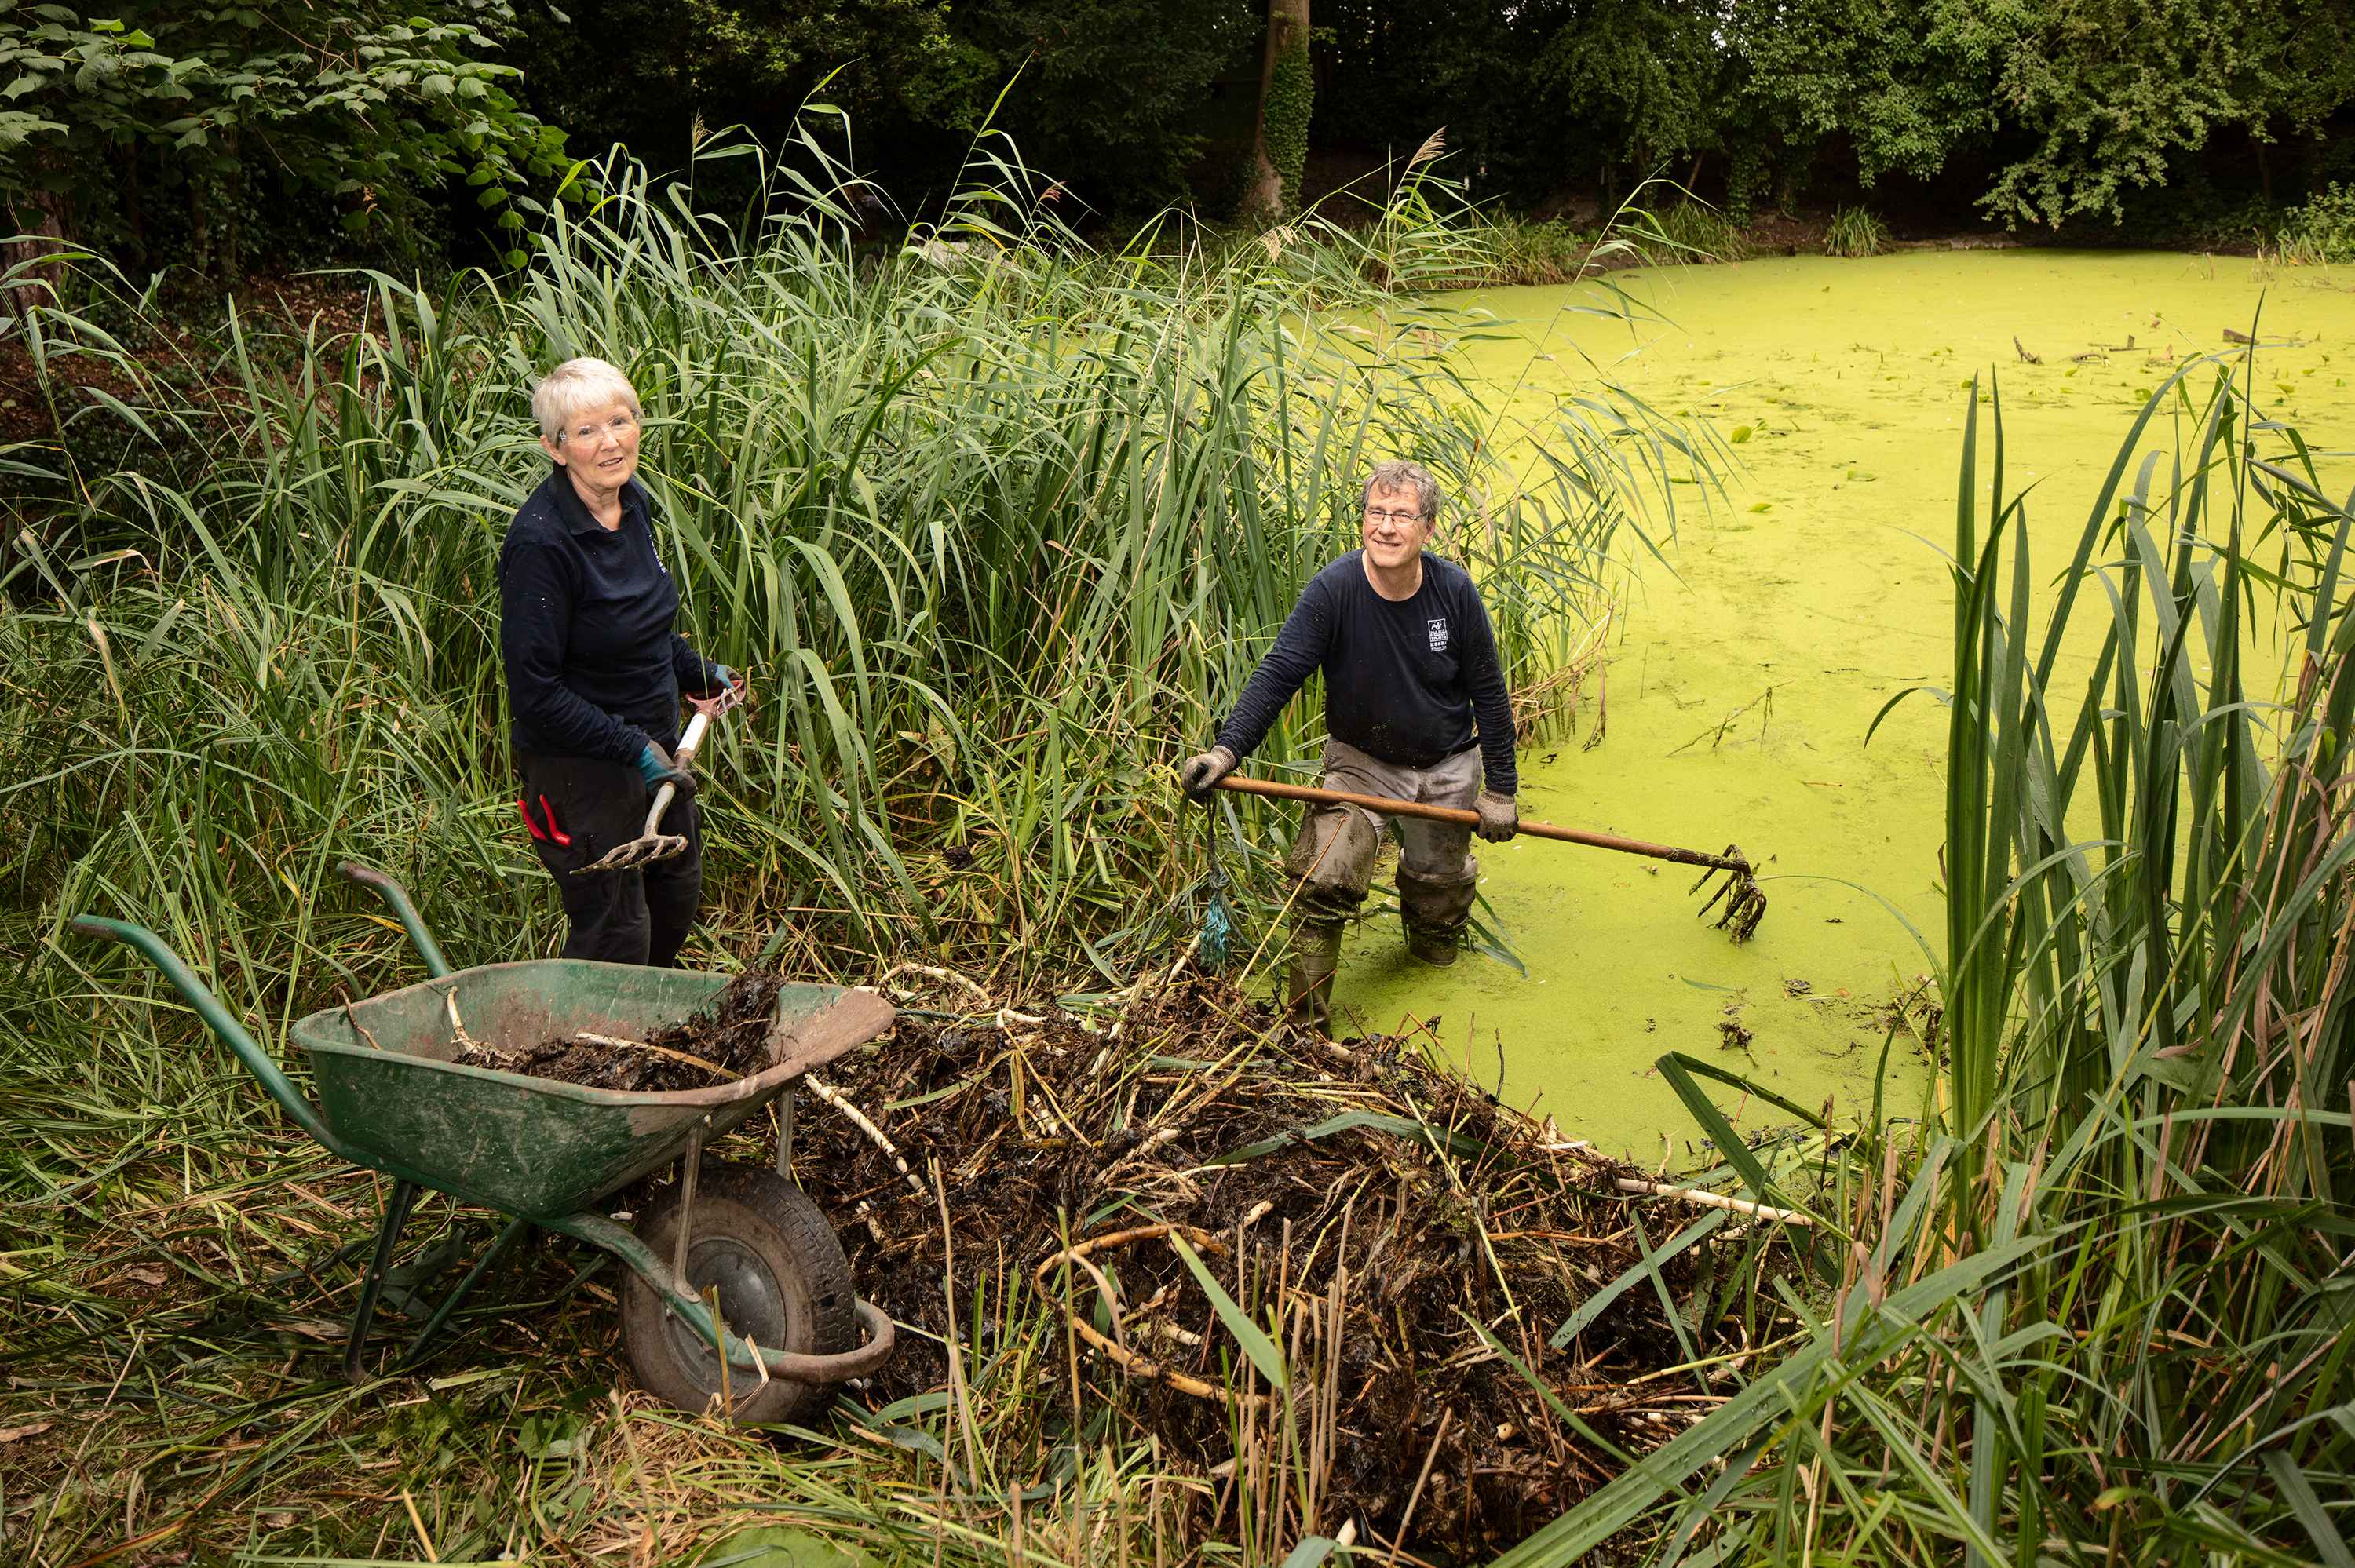 A pond covered in green algae shows on the right half of the image. At the near edge of the pond, between two large clumps of reeds, a man stands in the water, holding a large rake and a woman stands on the bank, next to a wheelbarrow holding a garden fork.